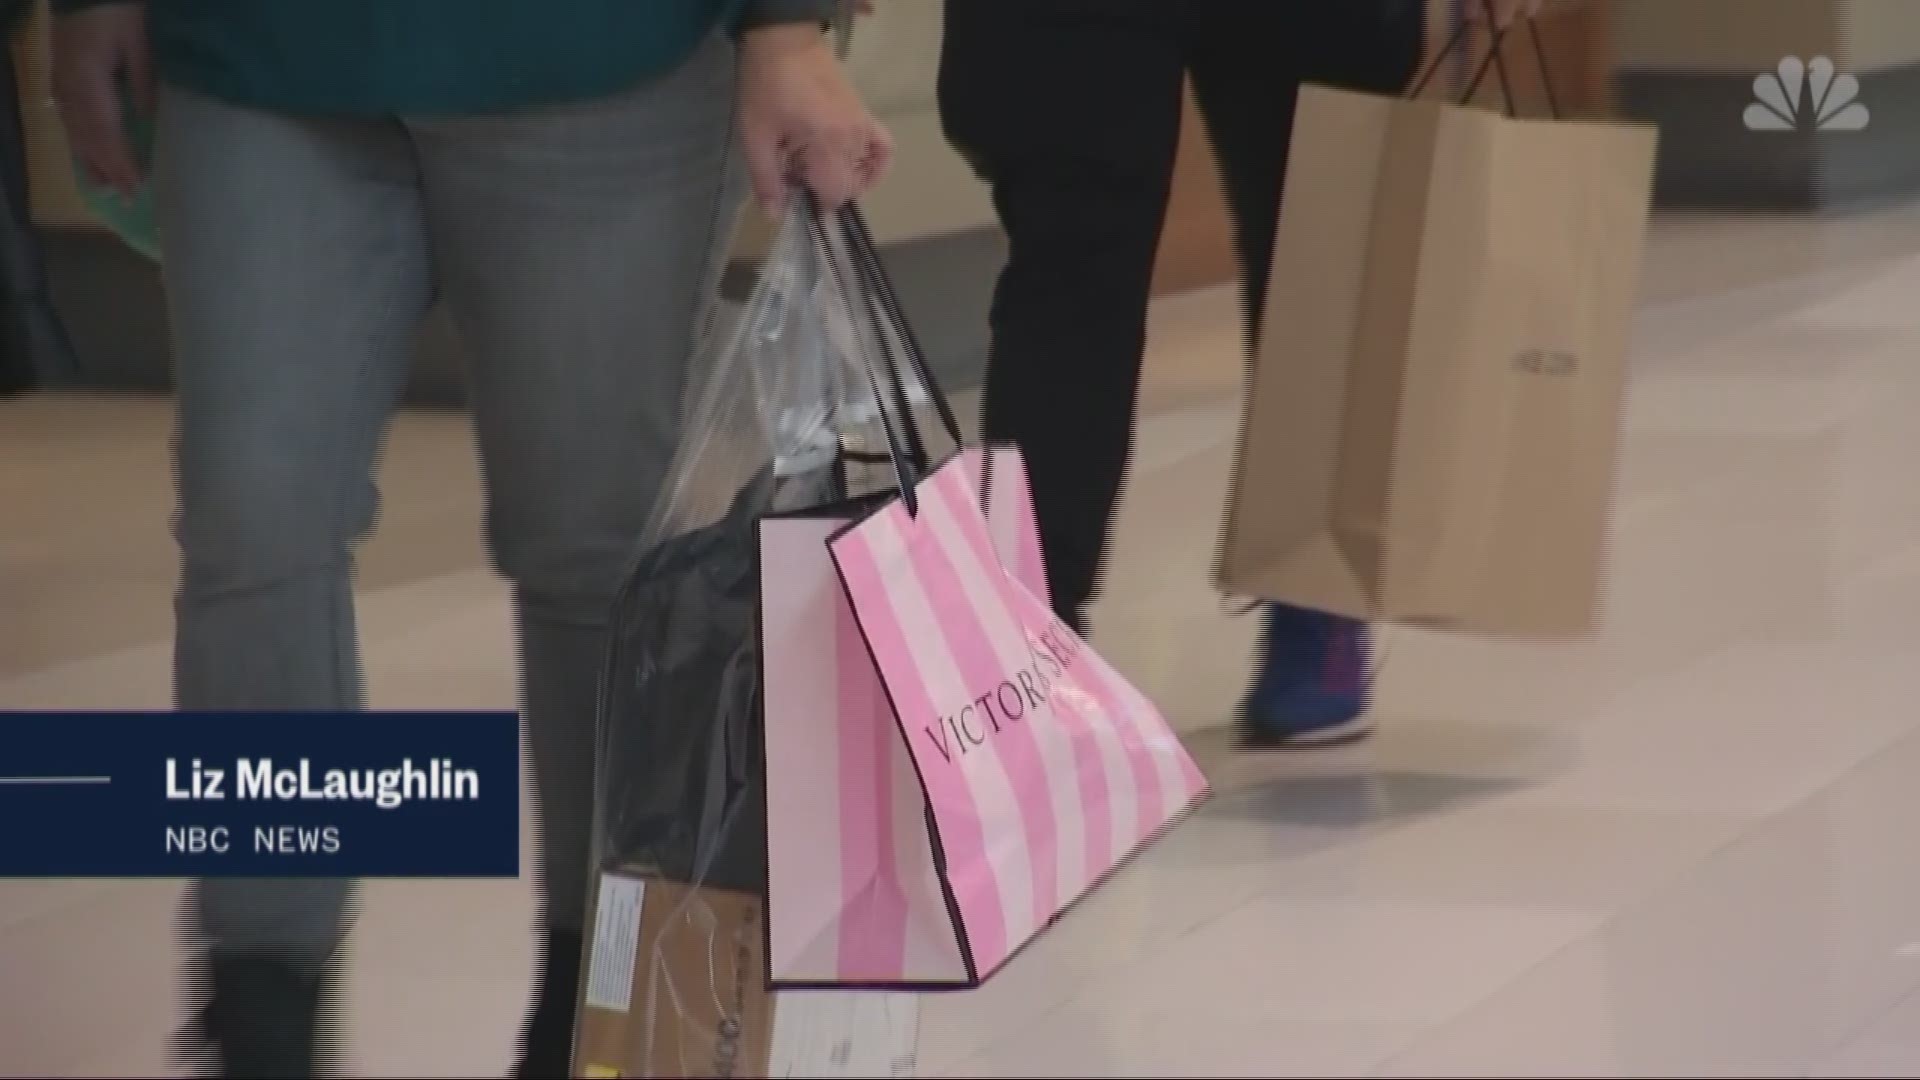 Still working to pick up last minute gifts for friends and family? NBC's Liz McLaughlin has some suggestions.